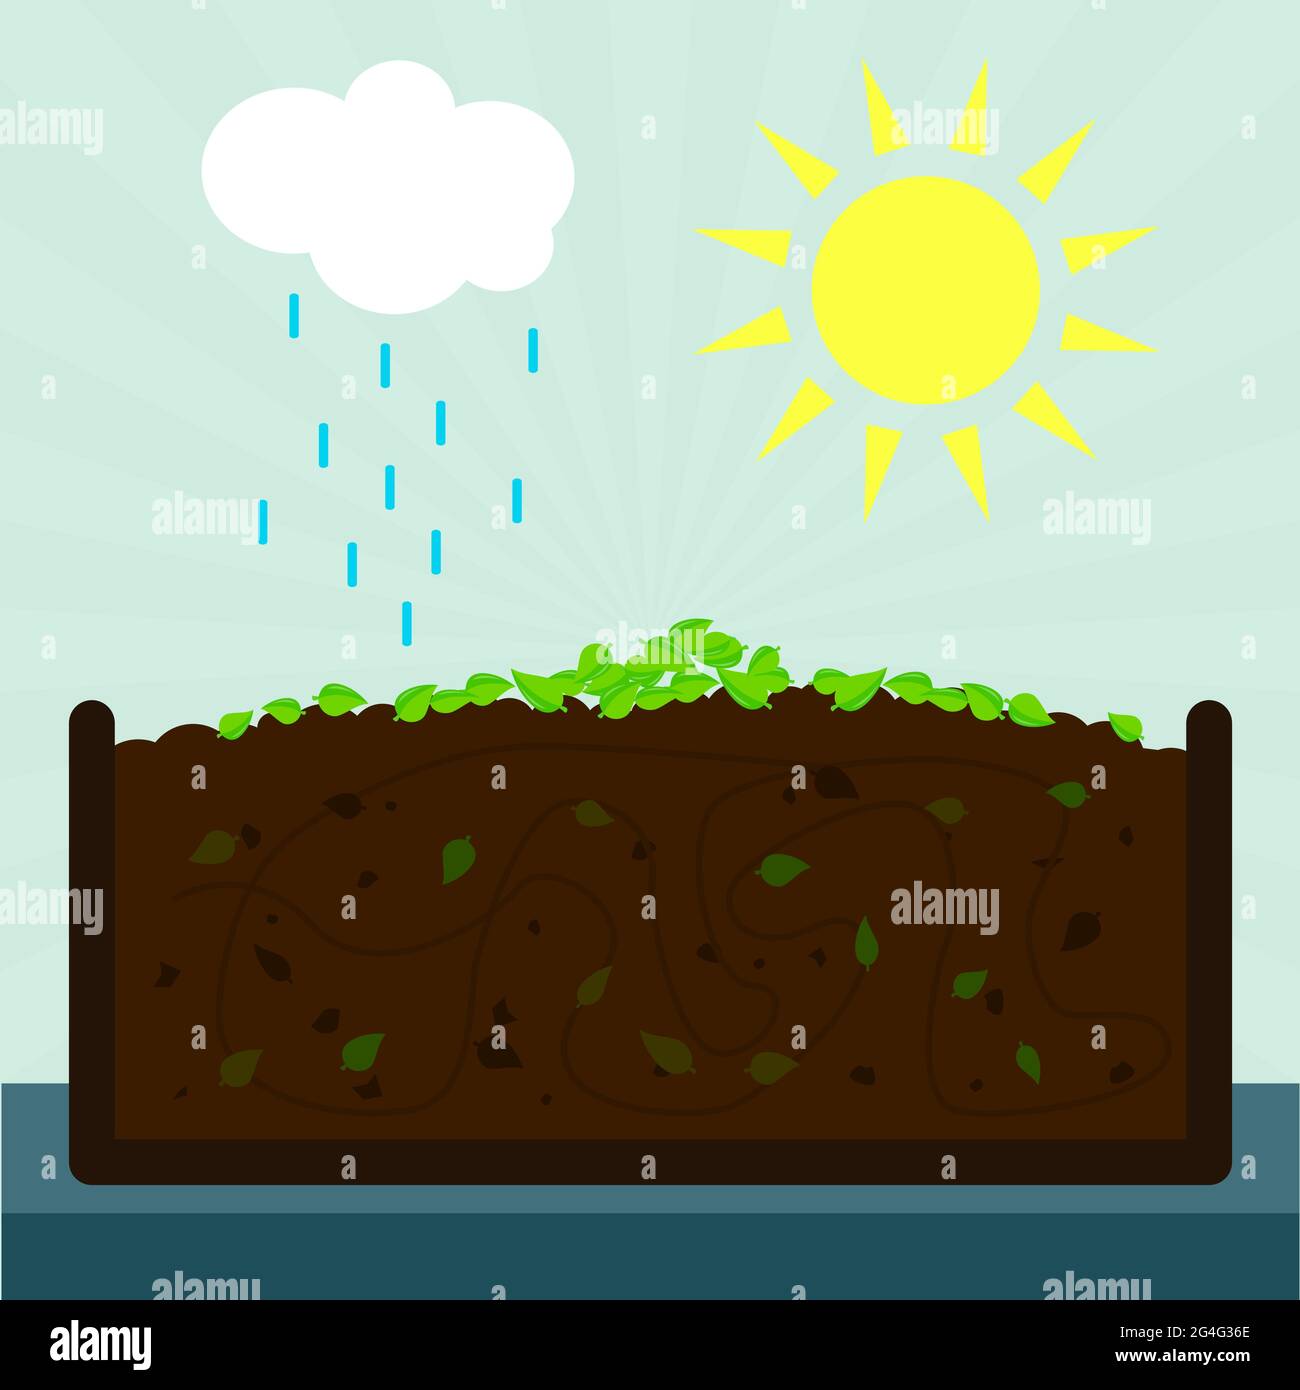 Composting process. Decomposed leaves on the ground. Irrigation and evaporation in the ecosystem. Stock Vector